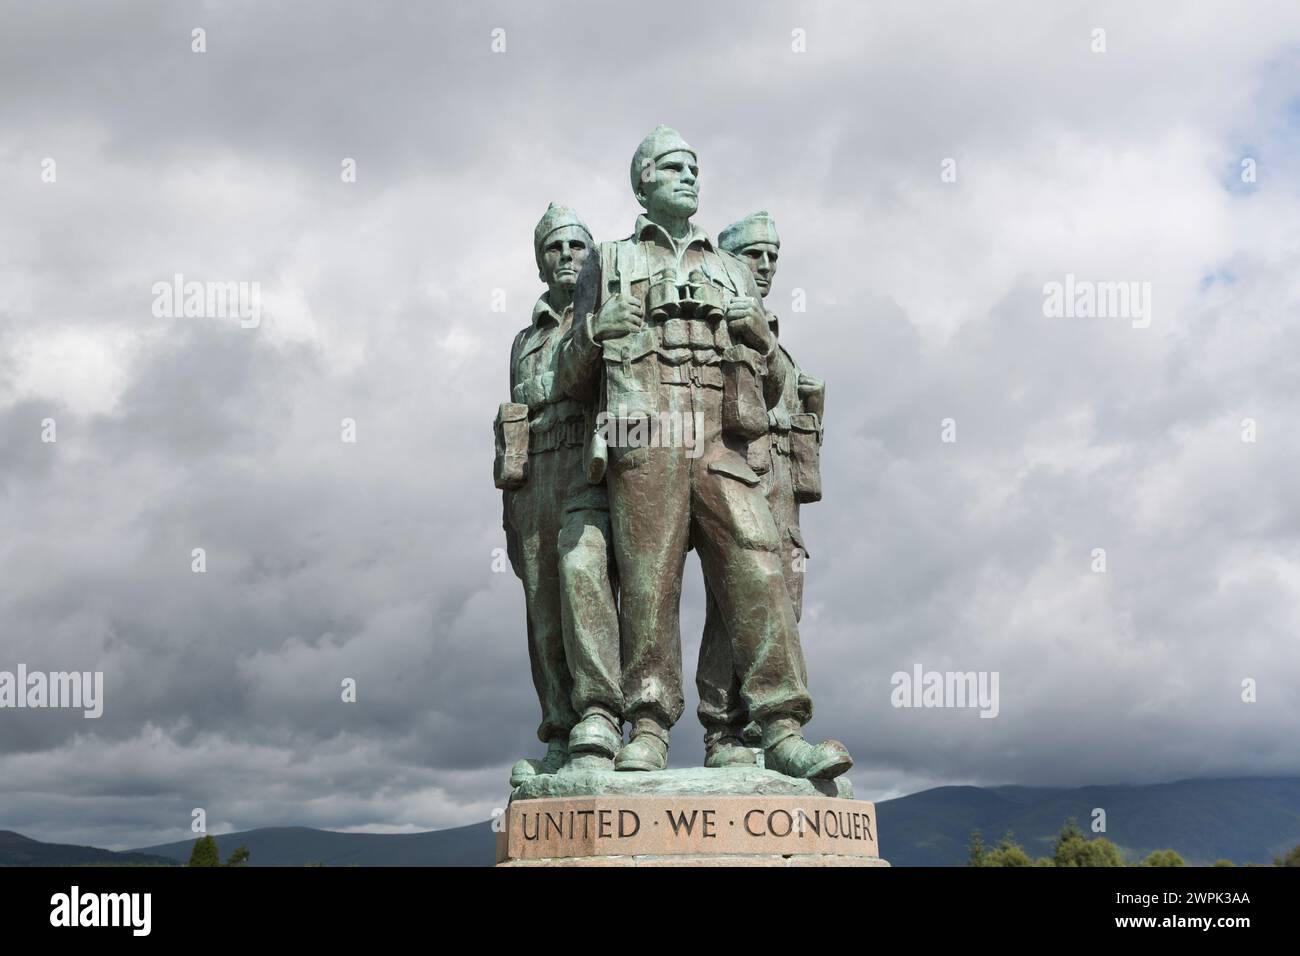 UK, Scotland, The Commando Memorial is a monument in Lochaber, Scotland, dedicated to the men of the British Commando Units during World War II. Stock Photo